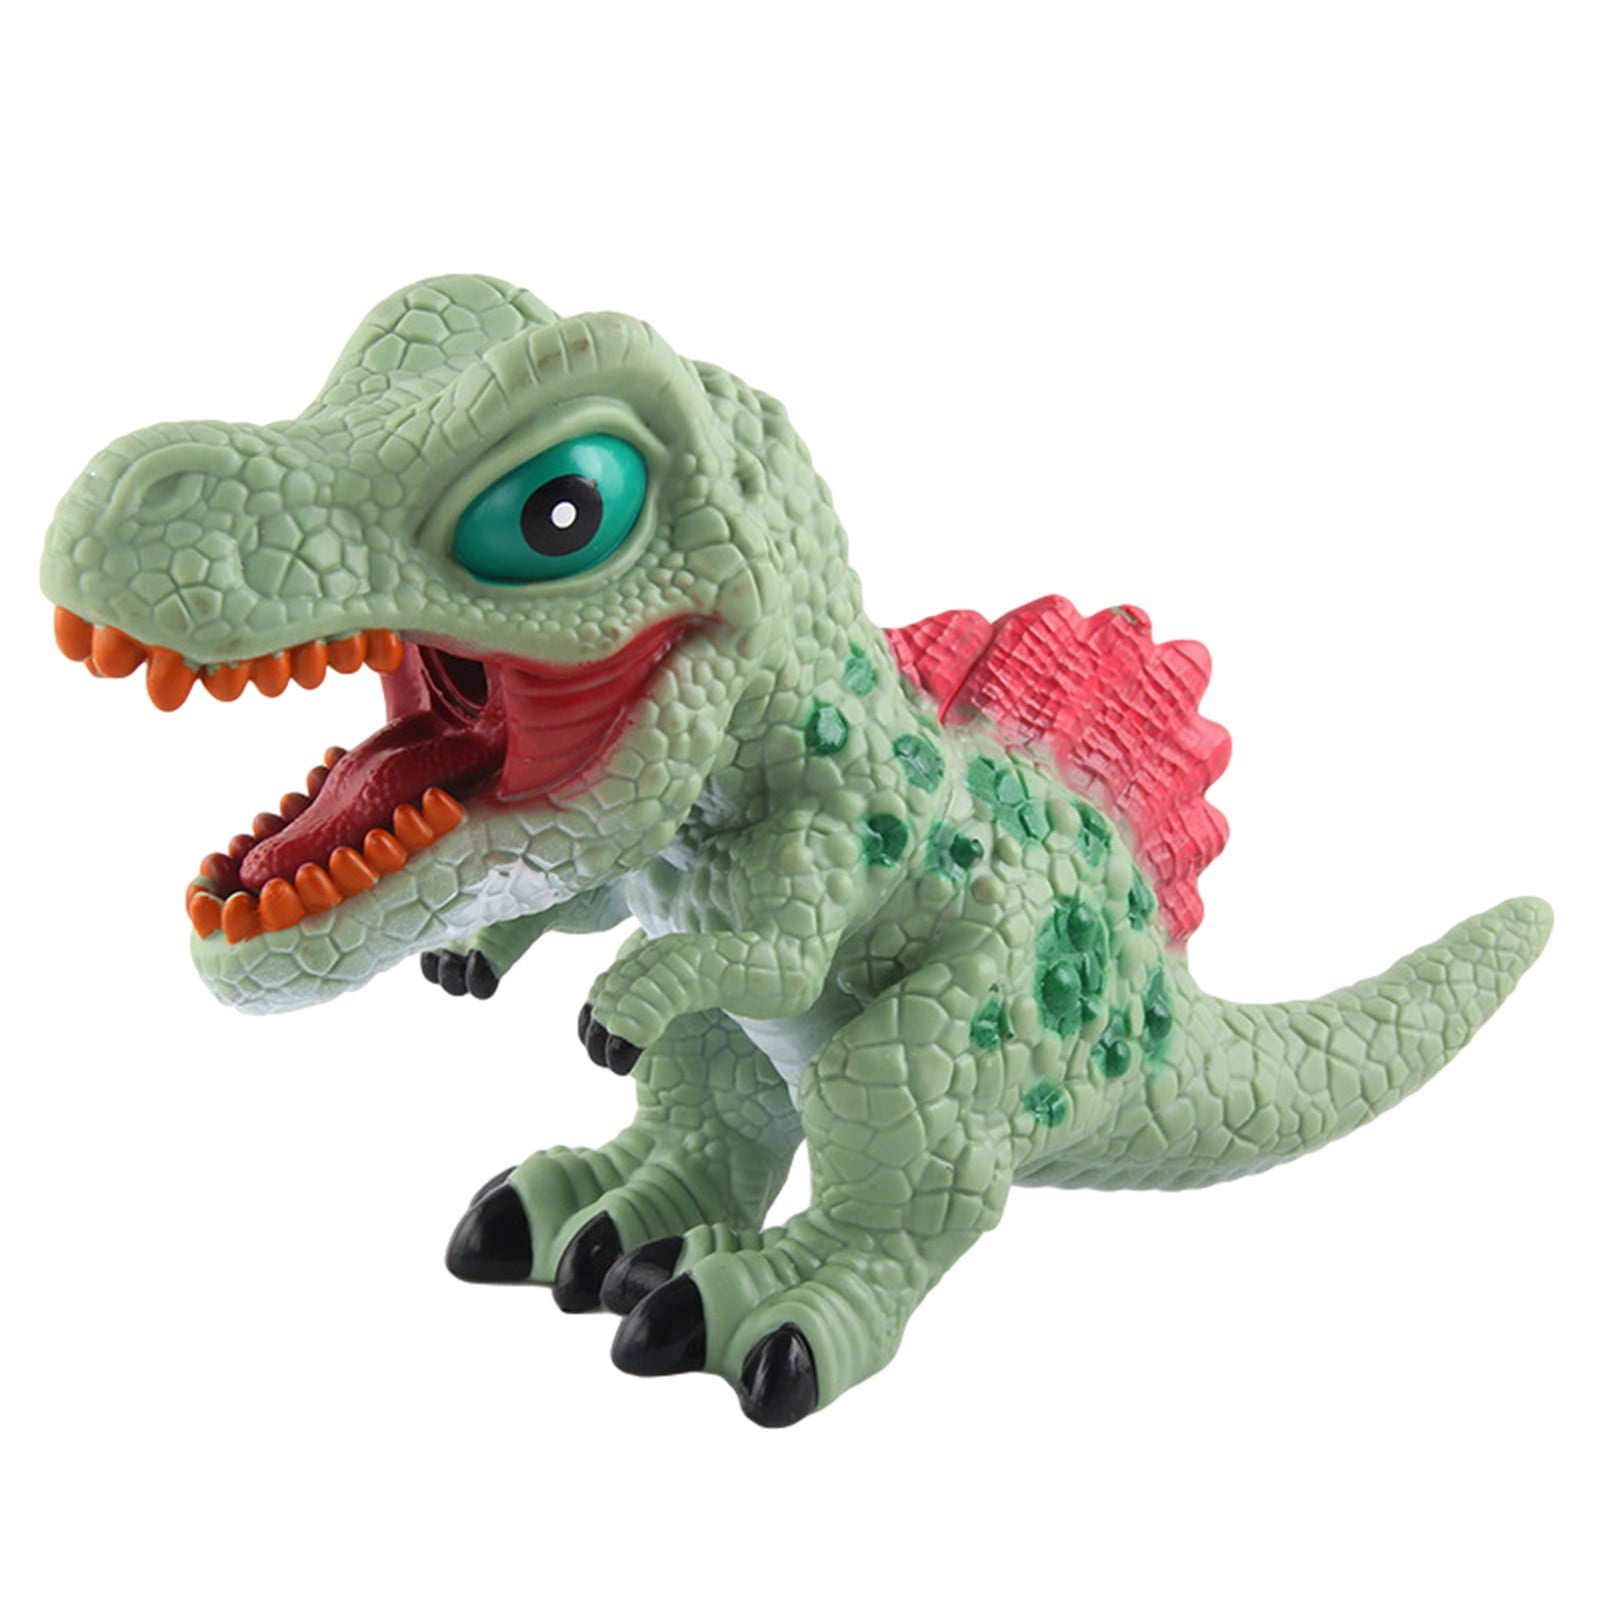 Soft Rubber Foam Stuffed Dinosaur Toy Action Figures With Roar Sounds Kids Toys 